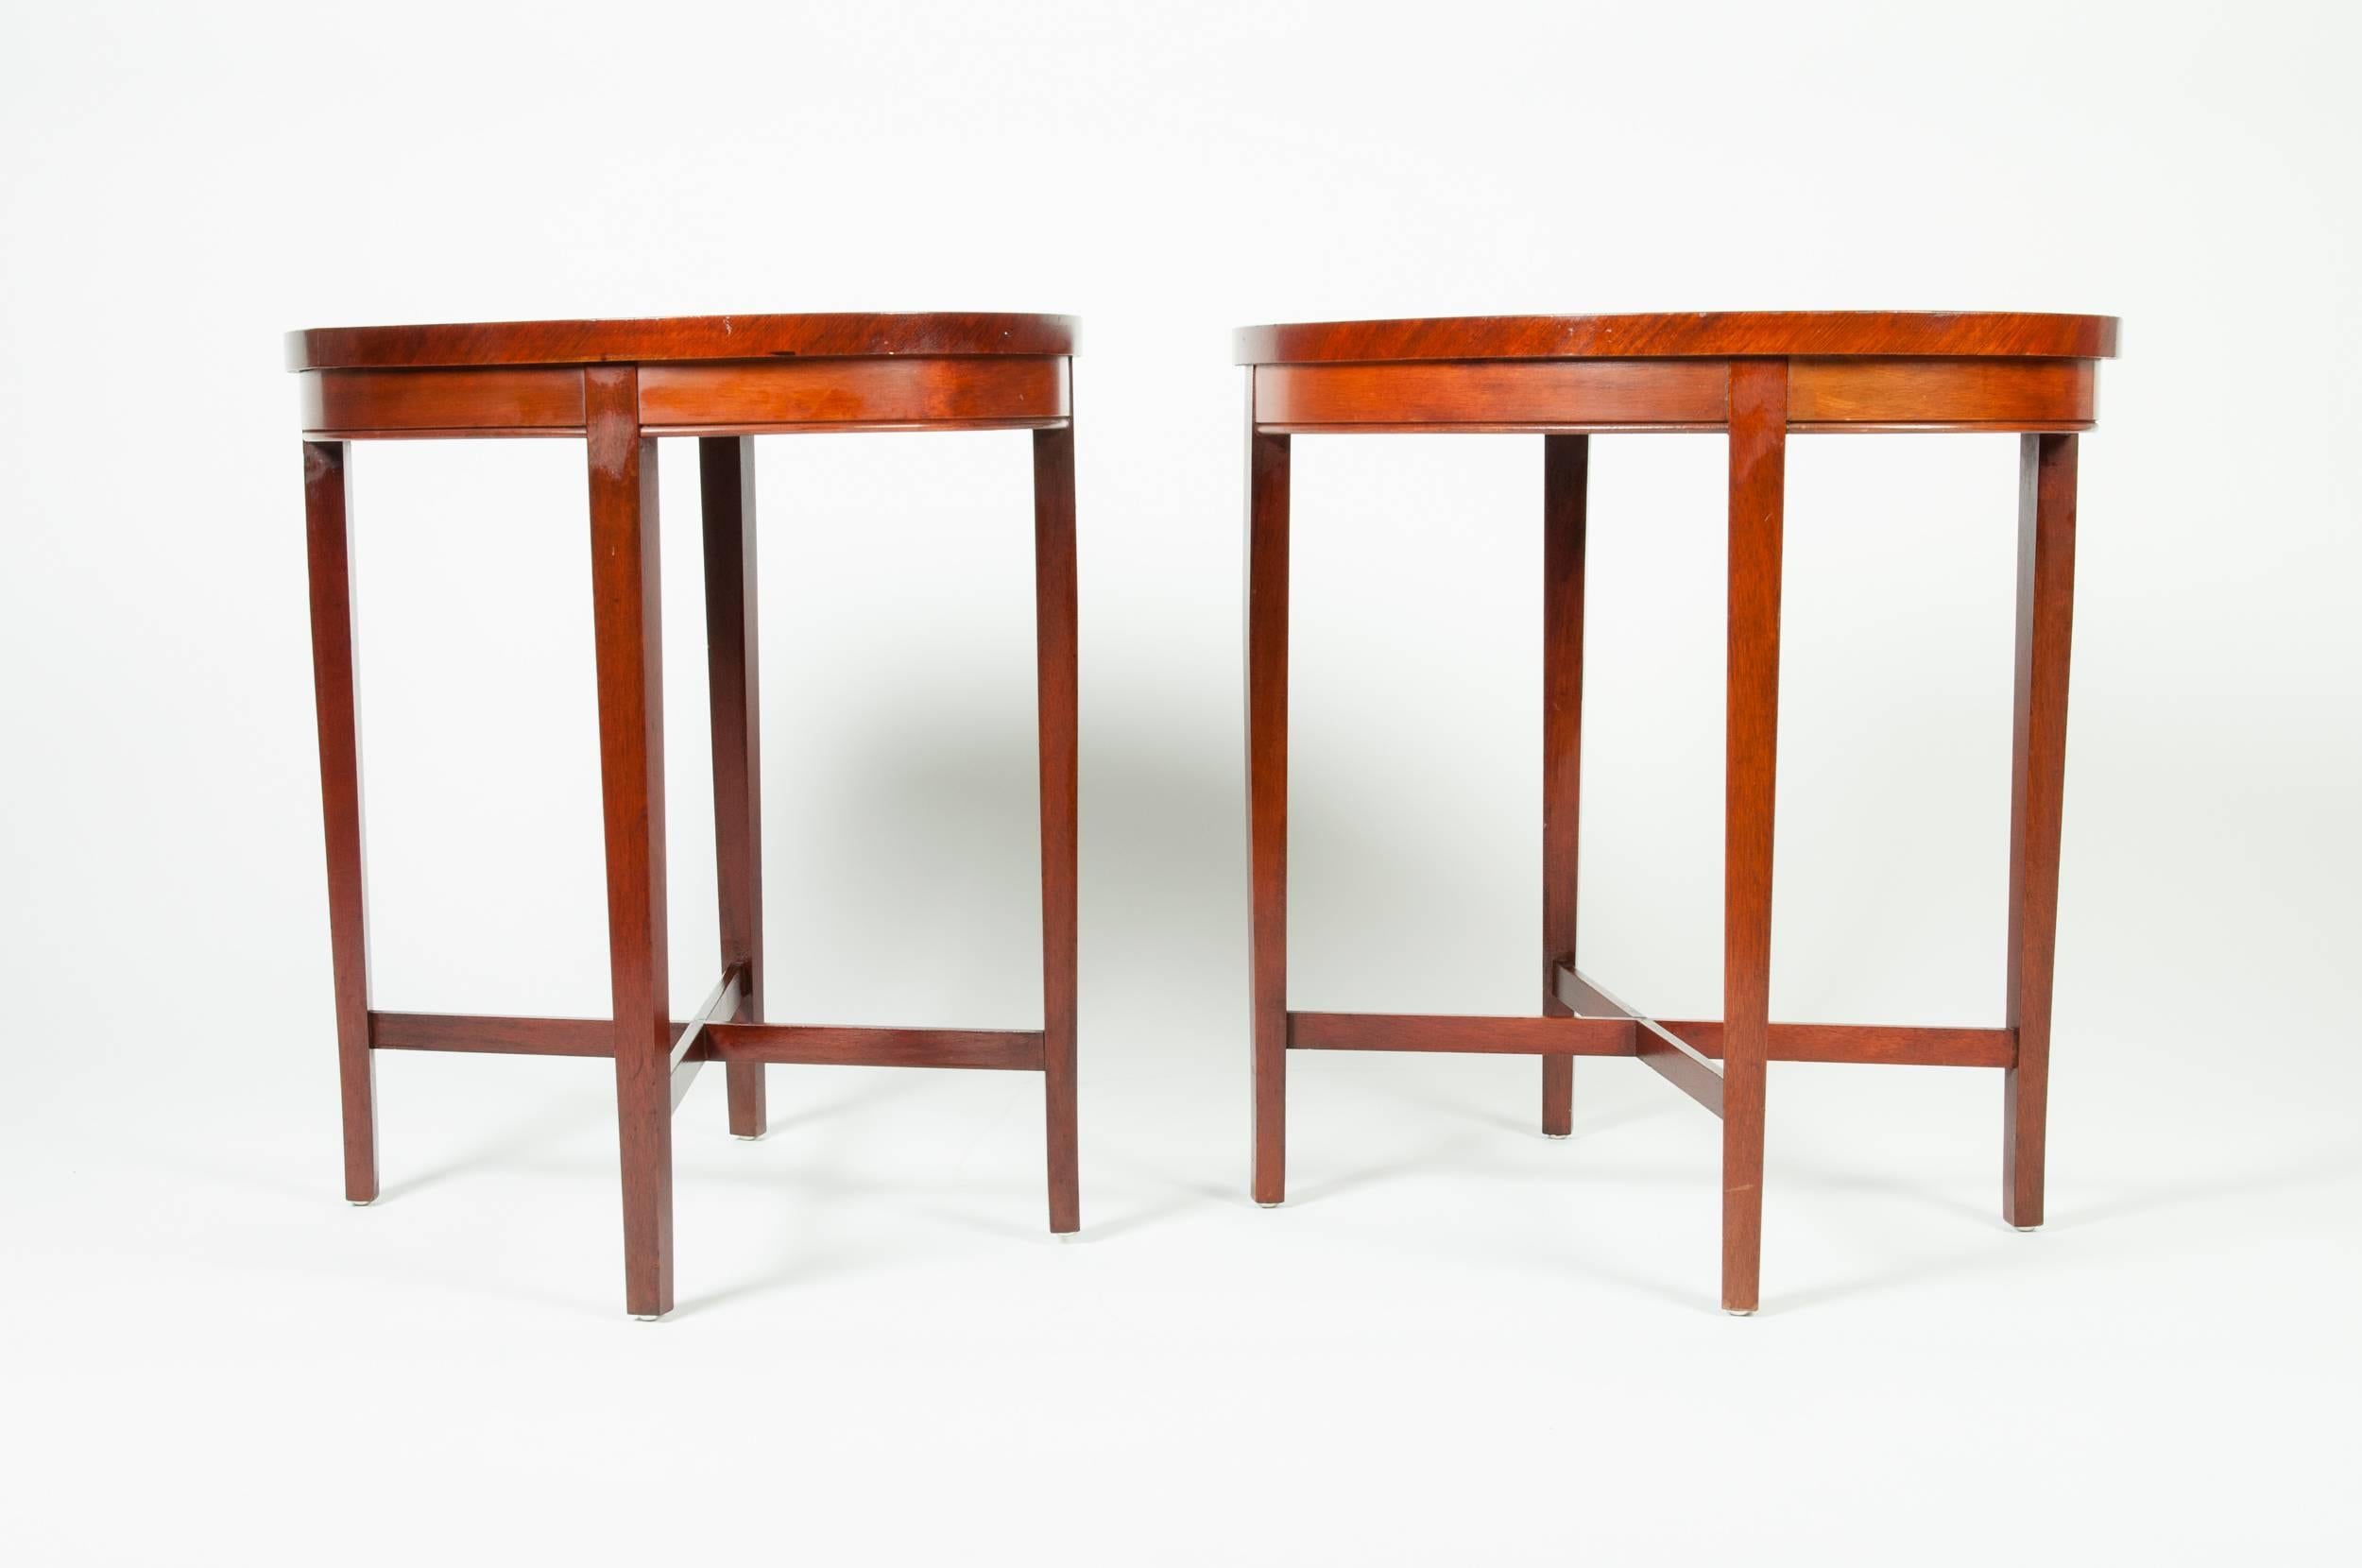 Vintage pair of mahogany wood oval side tables. The table's measures 23 inches high x 22 inches long x 22 inches width.